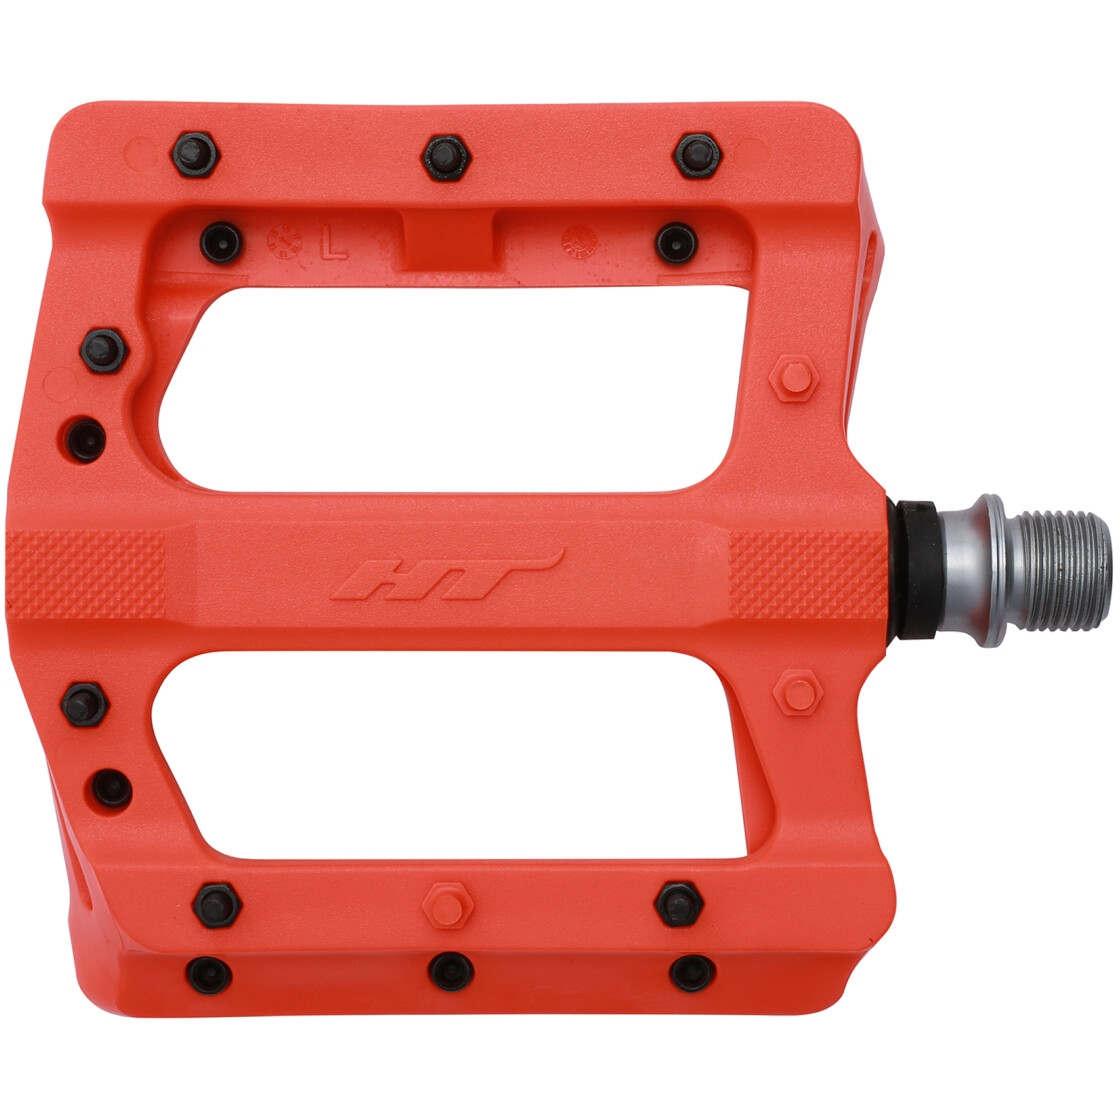 Picture of HT PA01A NANO P Flat Pedal - red